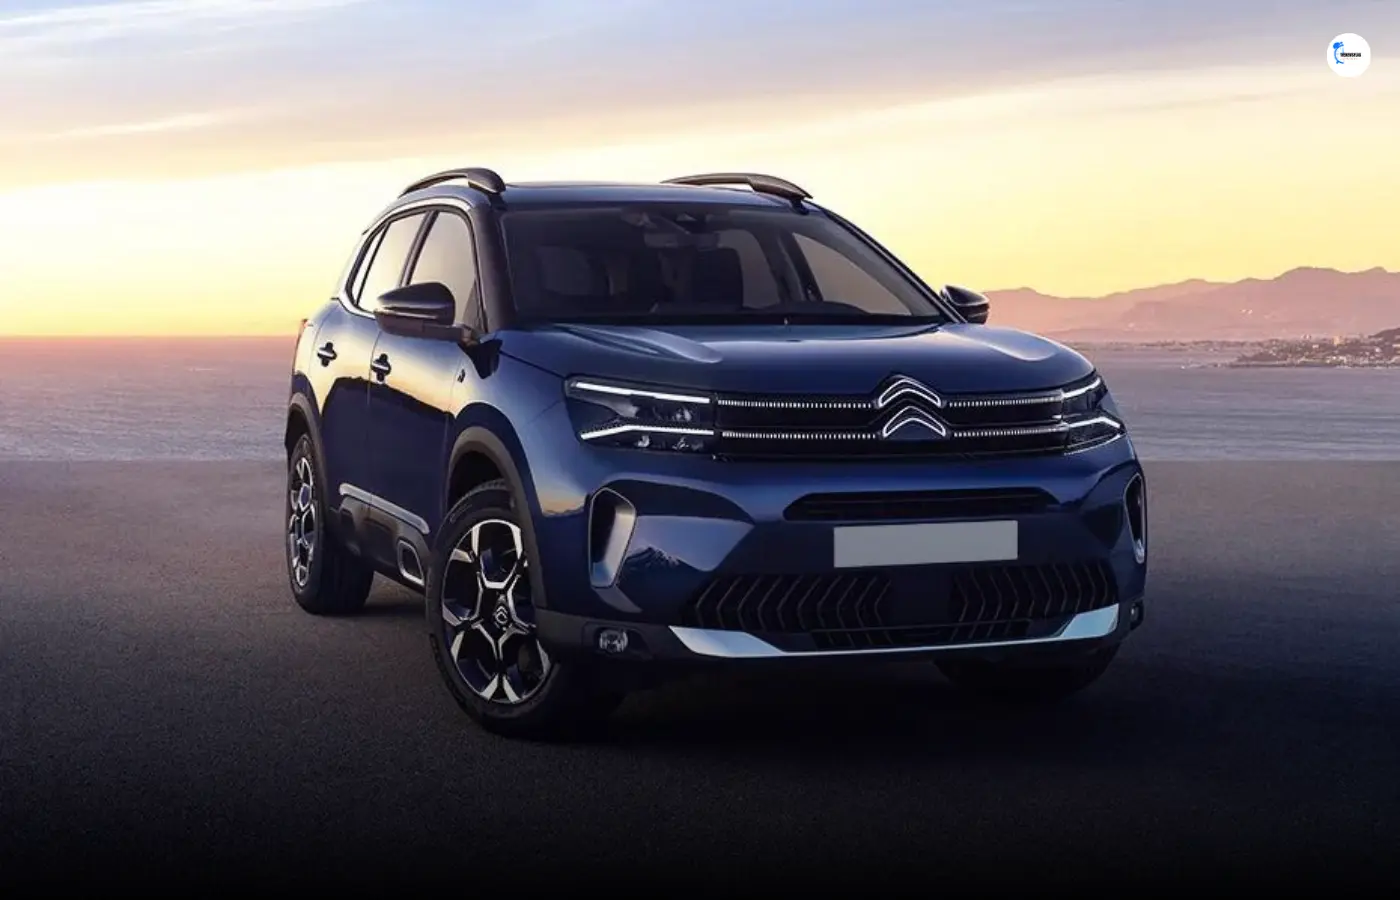 By the end of 2024, Citroen plans to expand its sales network in India to over 200 locations.